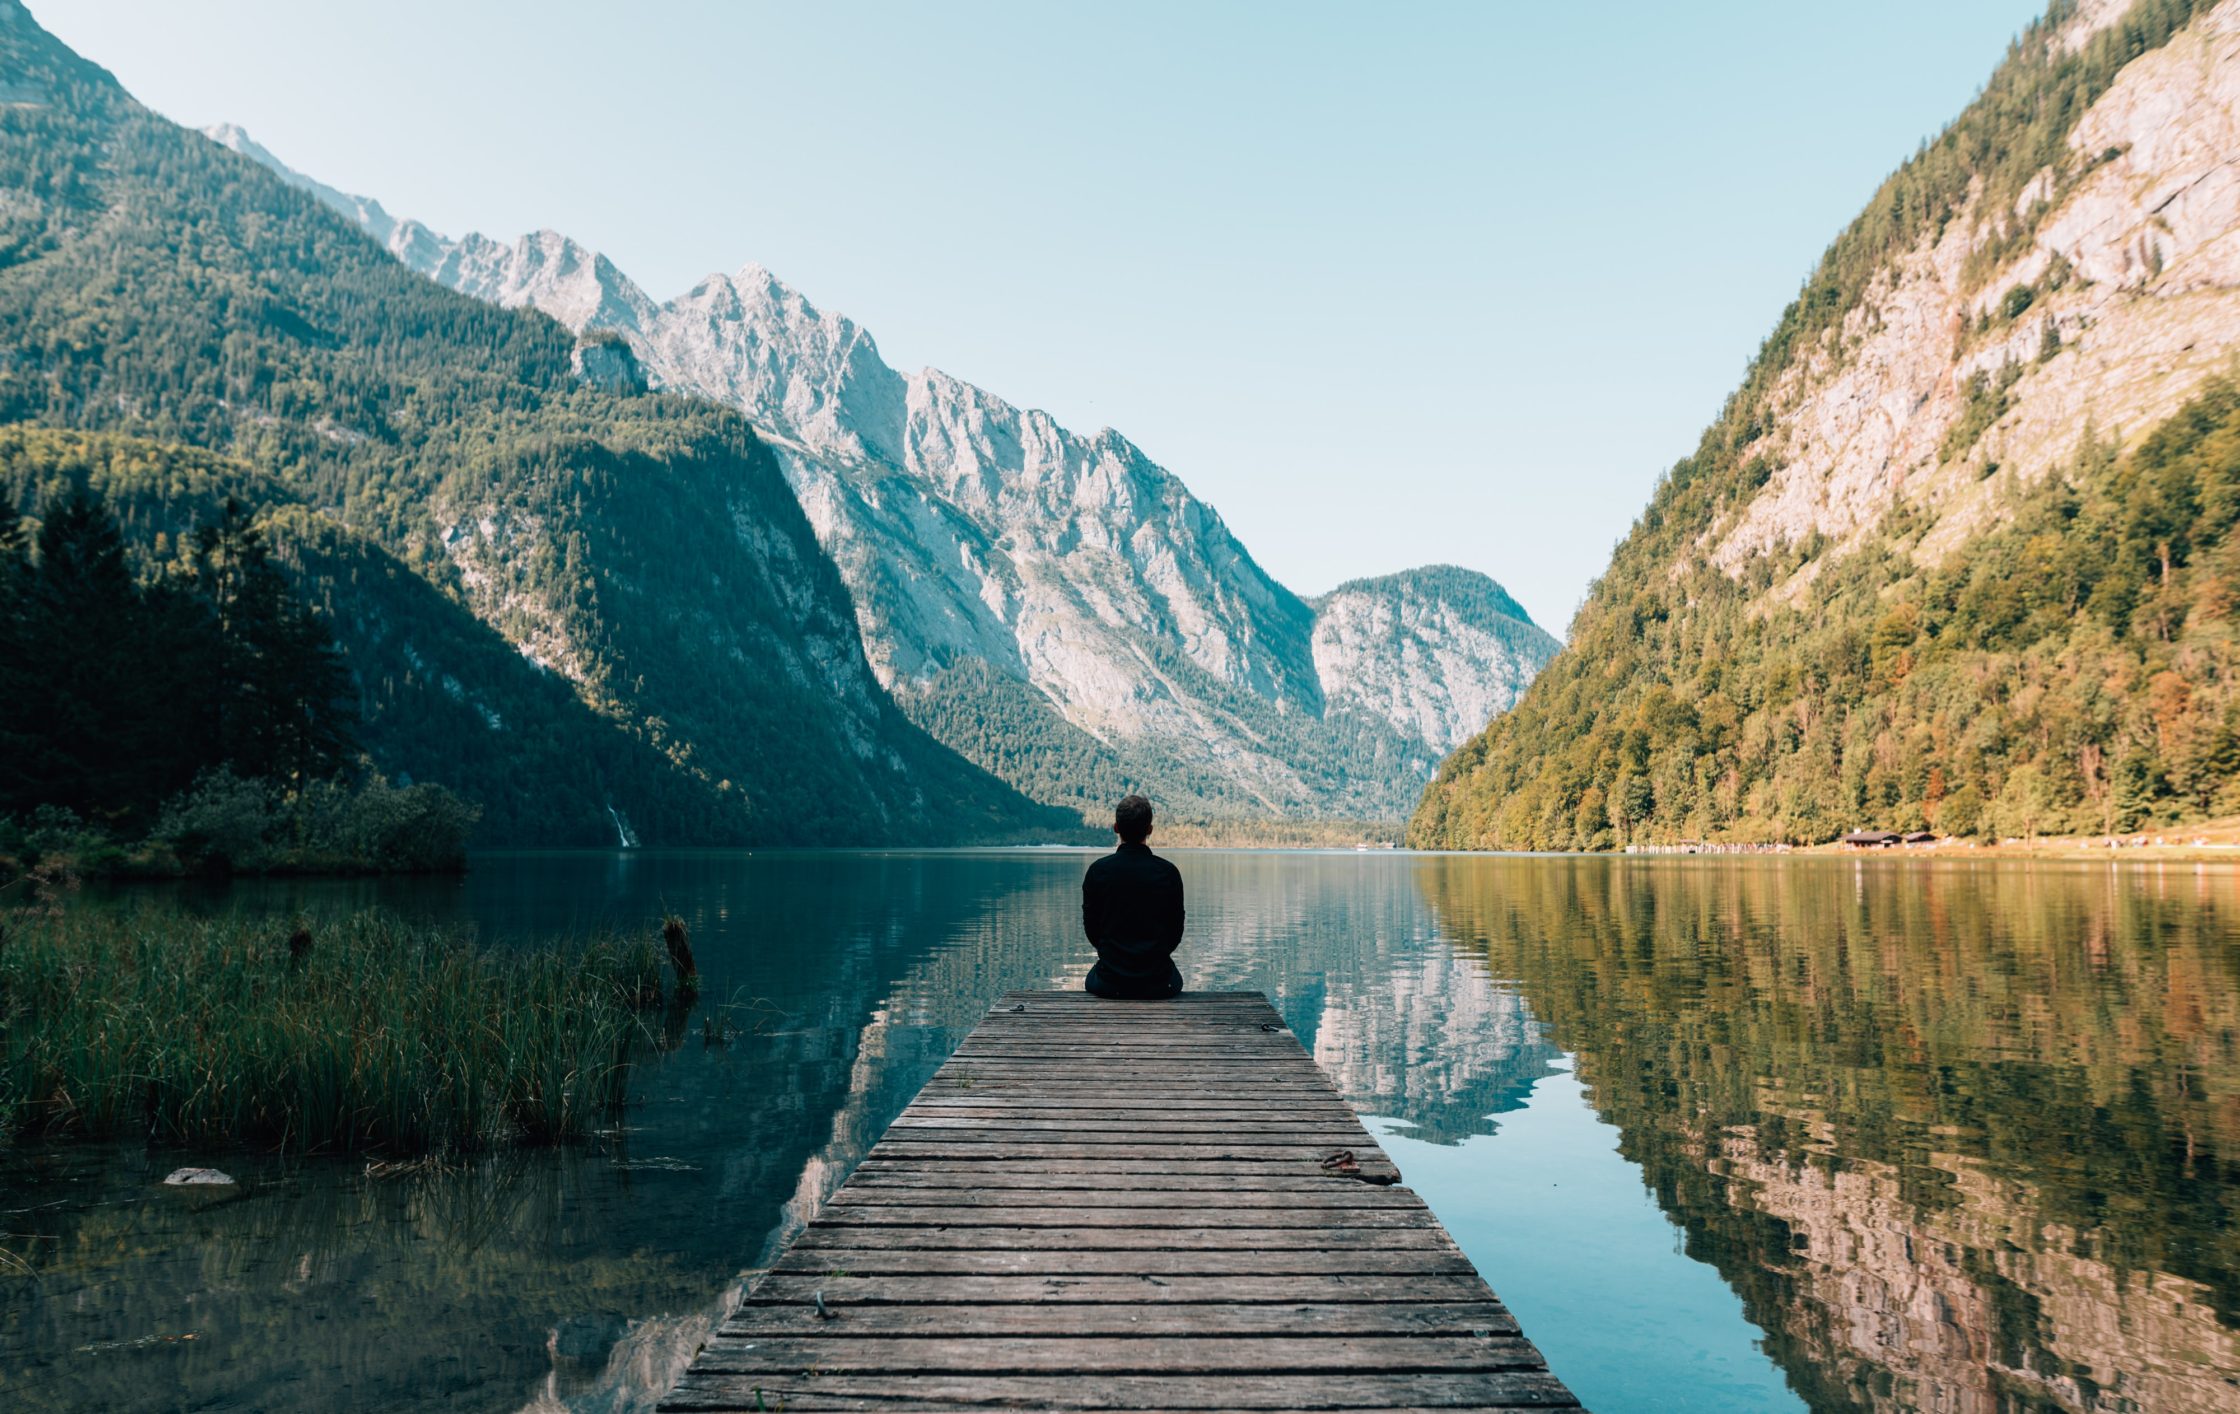 man meditating outdoors, overlooking mountain and lake scene. blue sky